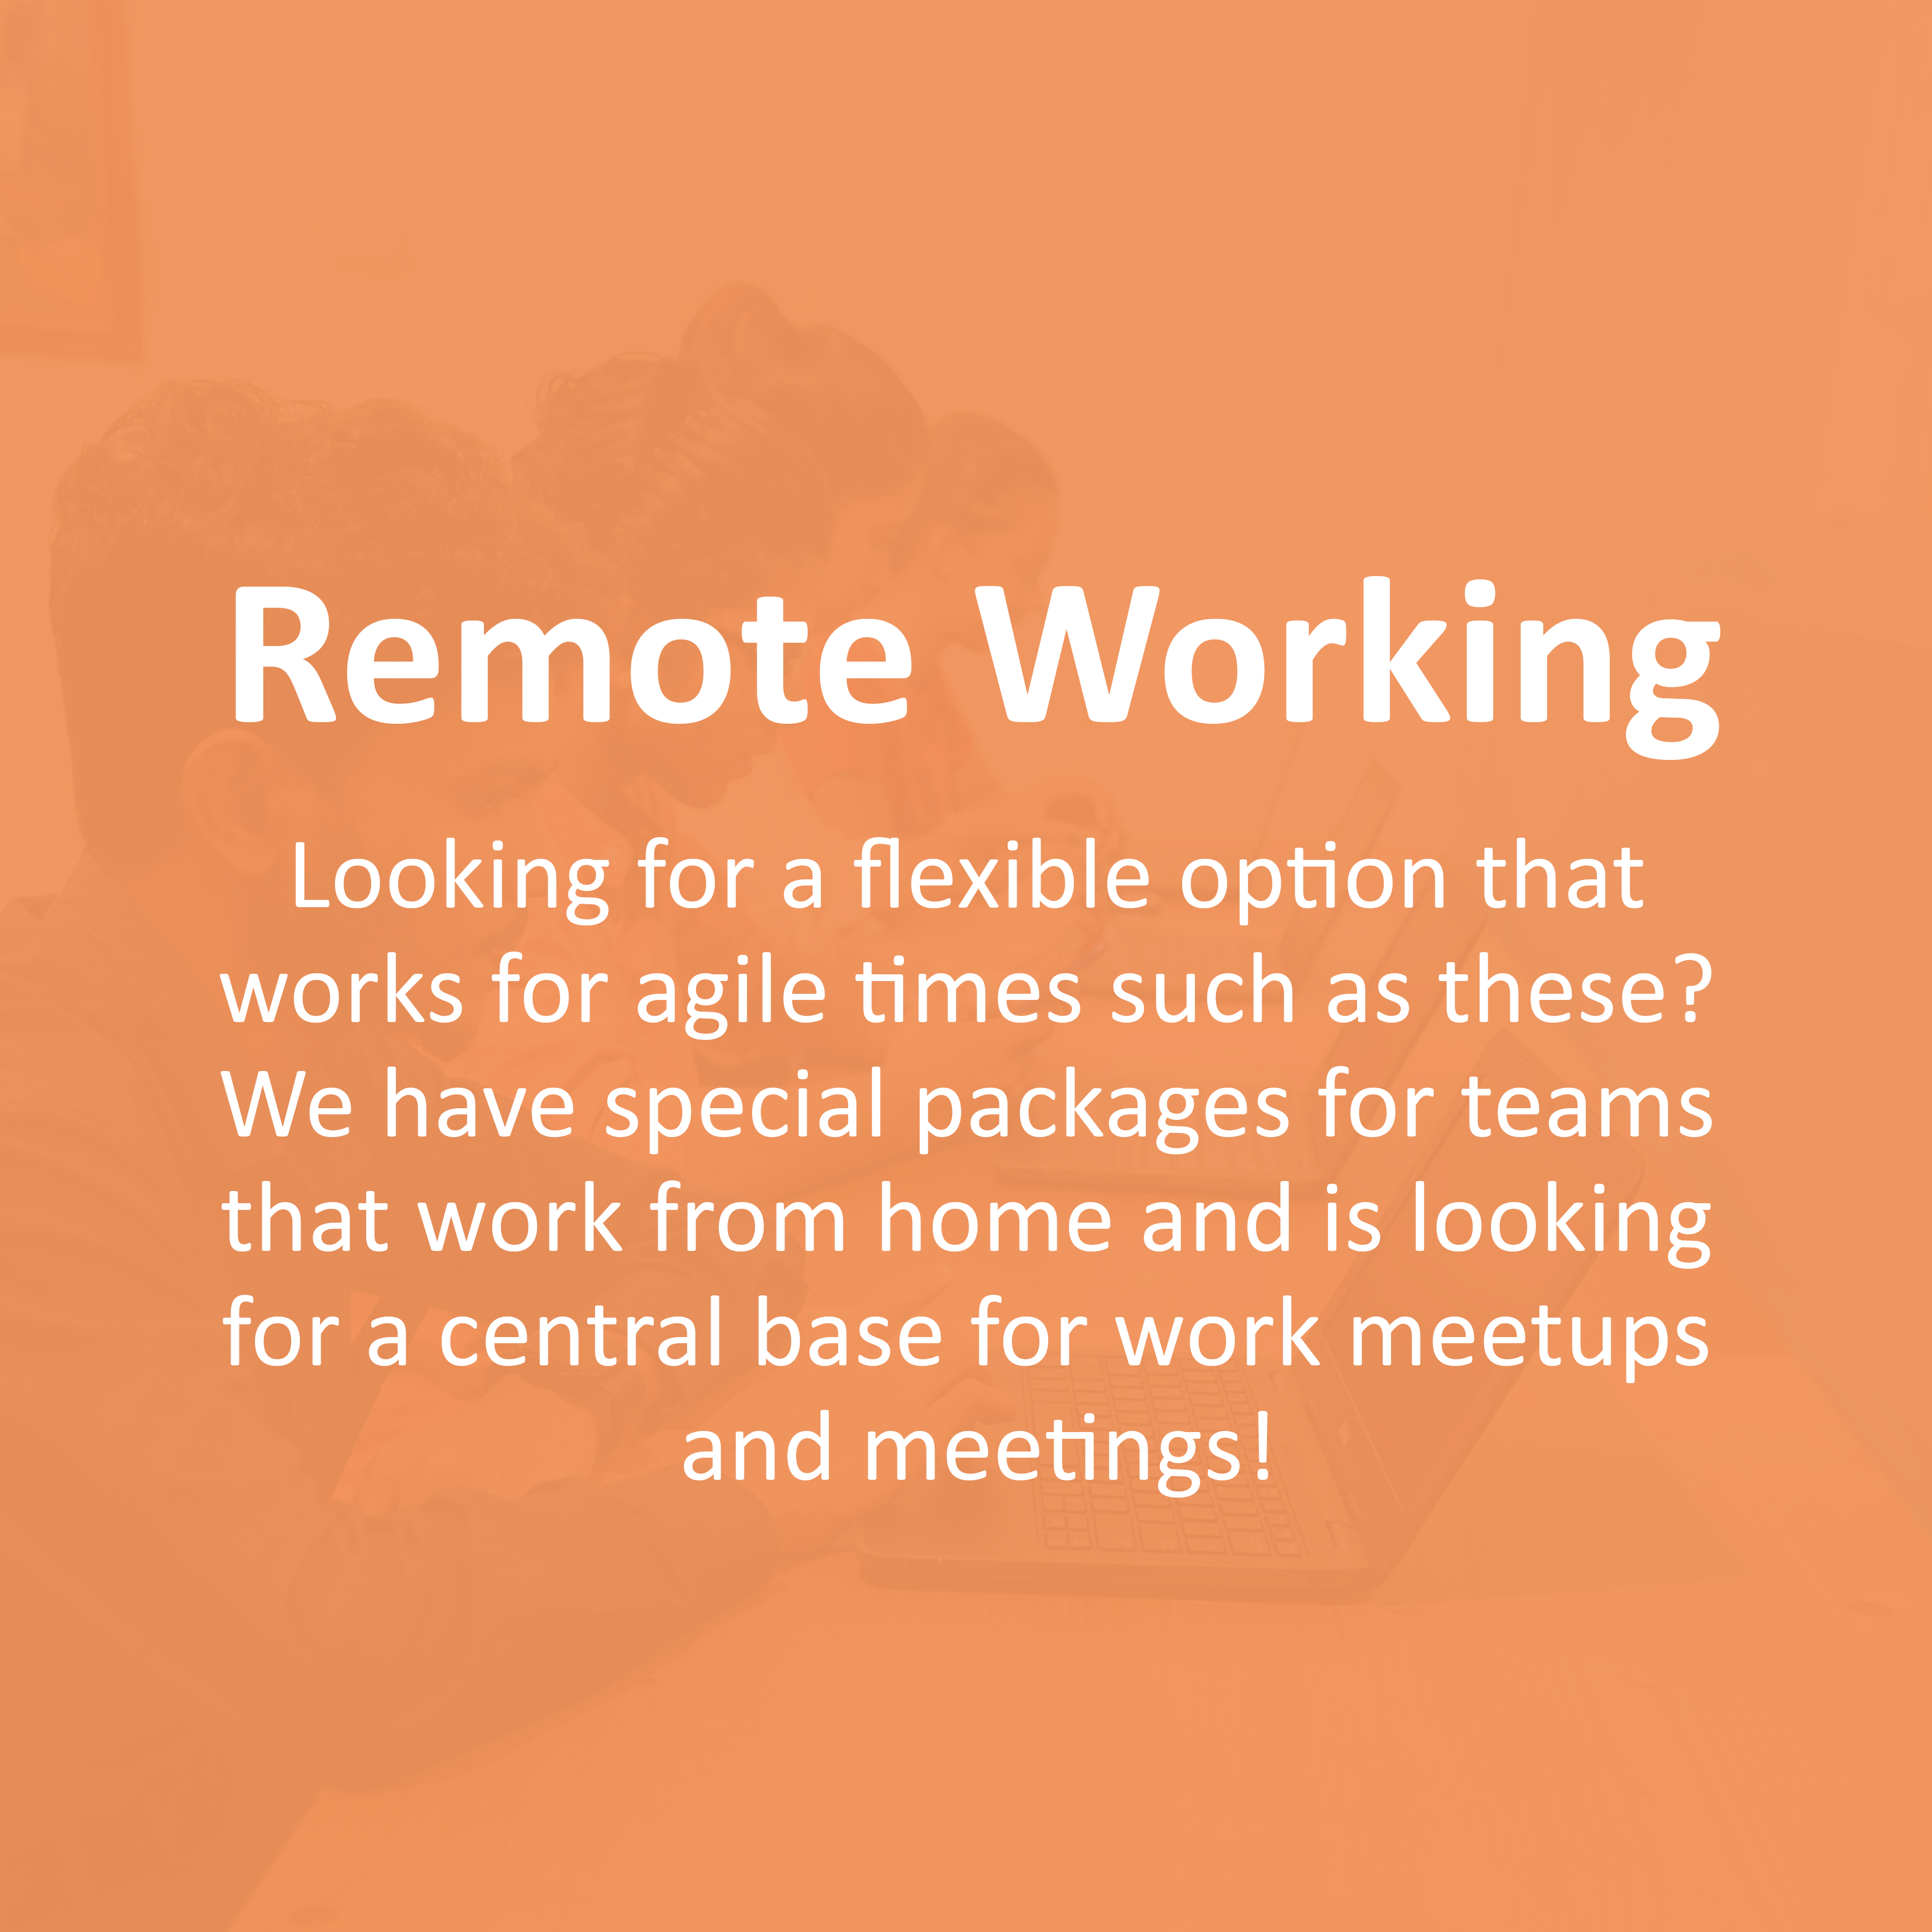 Remote Working Packages